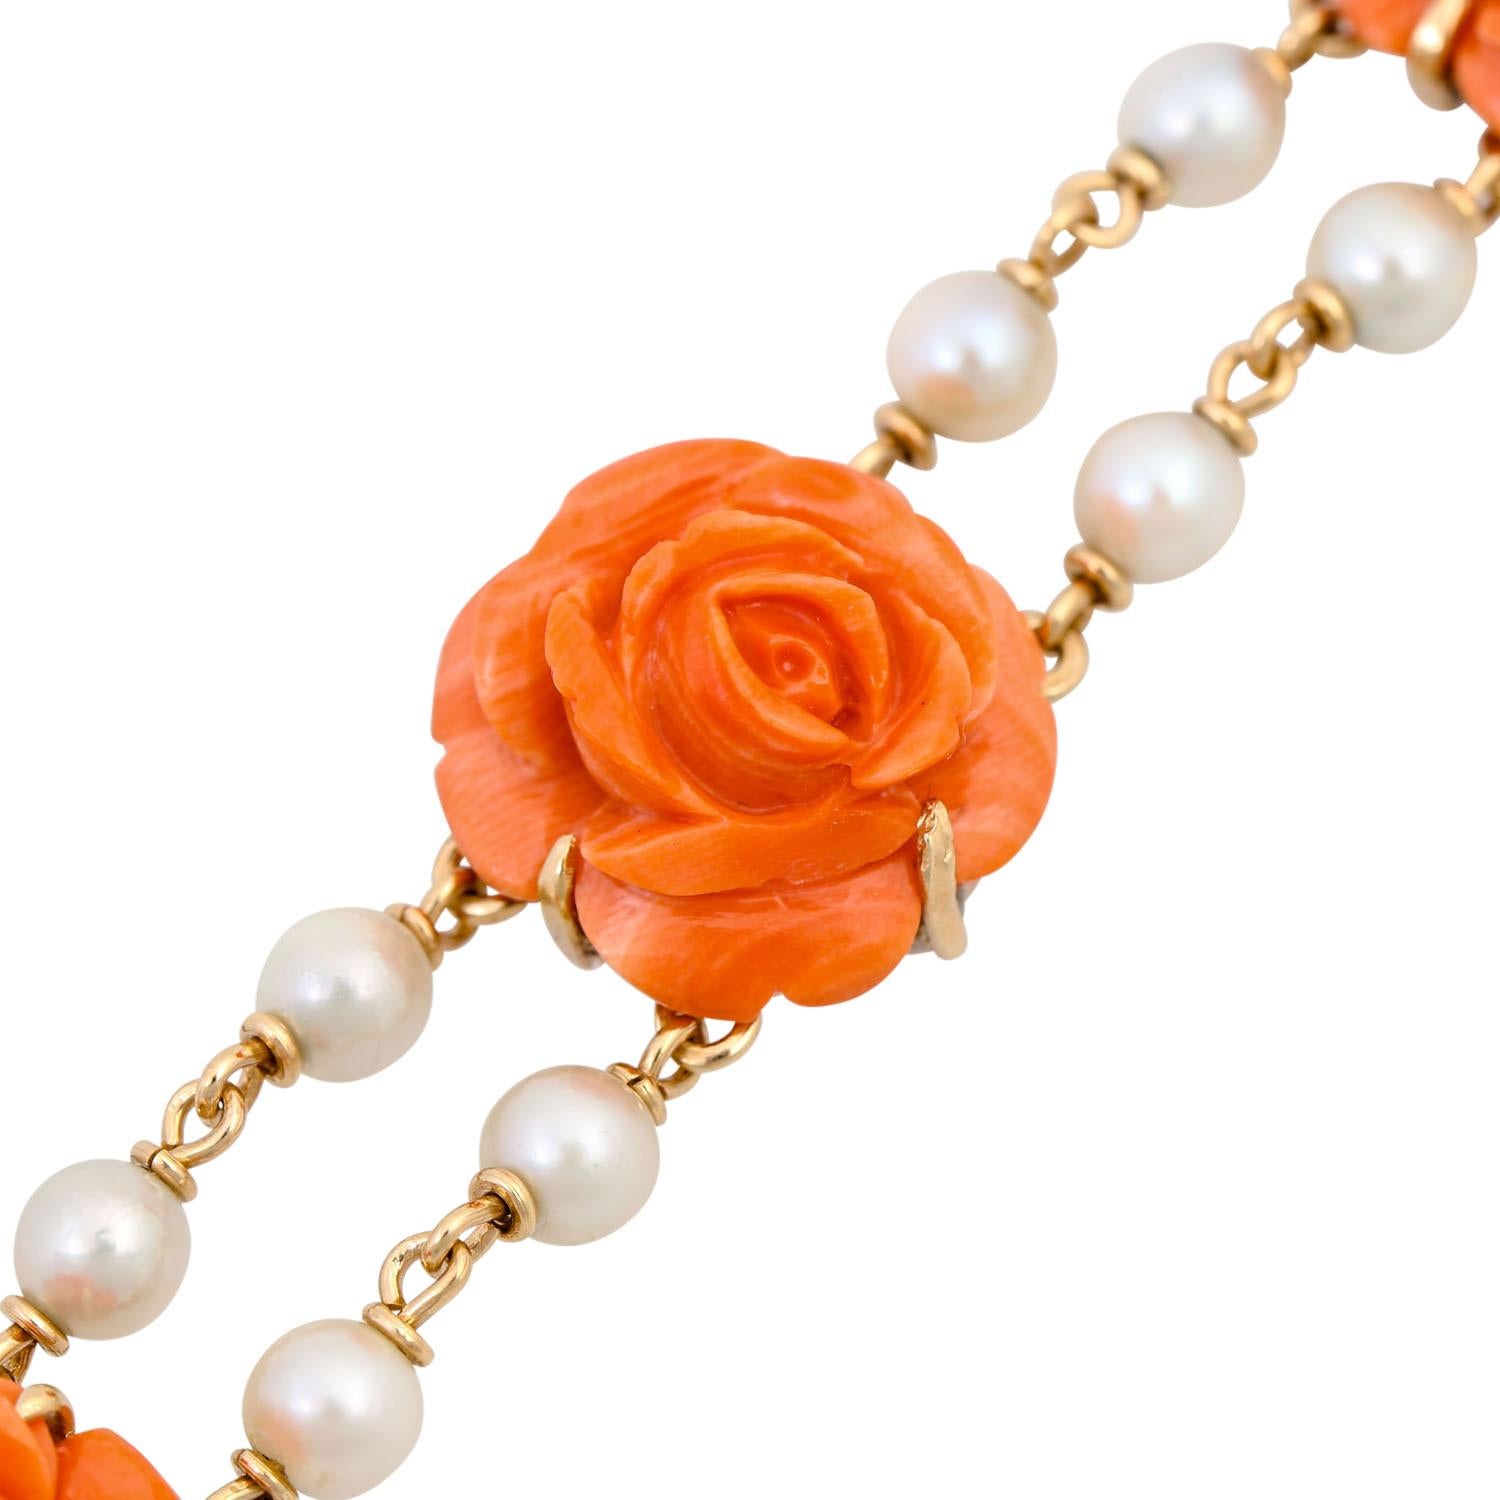 Kite Cut Bracelet with Precious Coral Cut in the Shape of a Rose For Sale